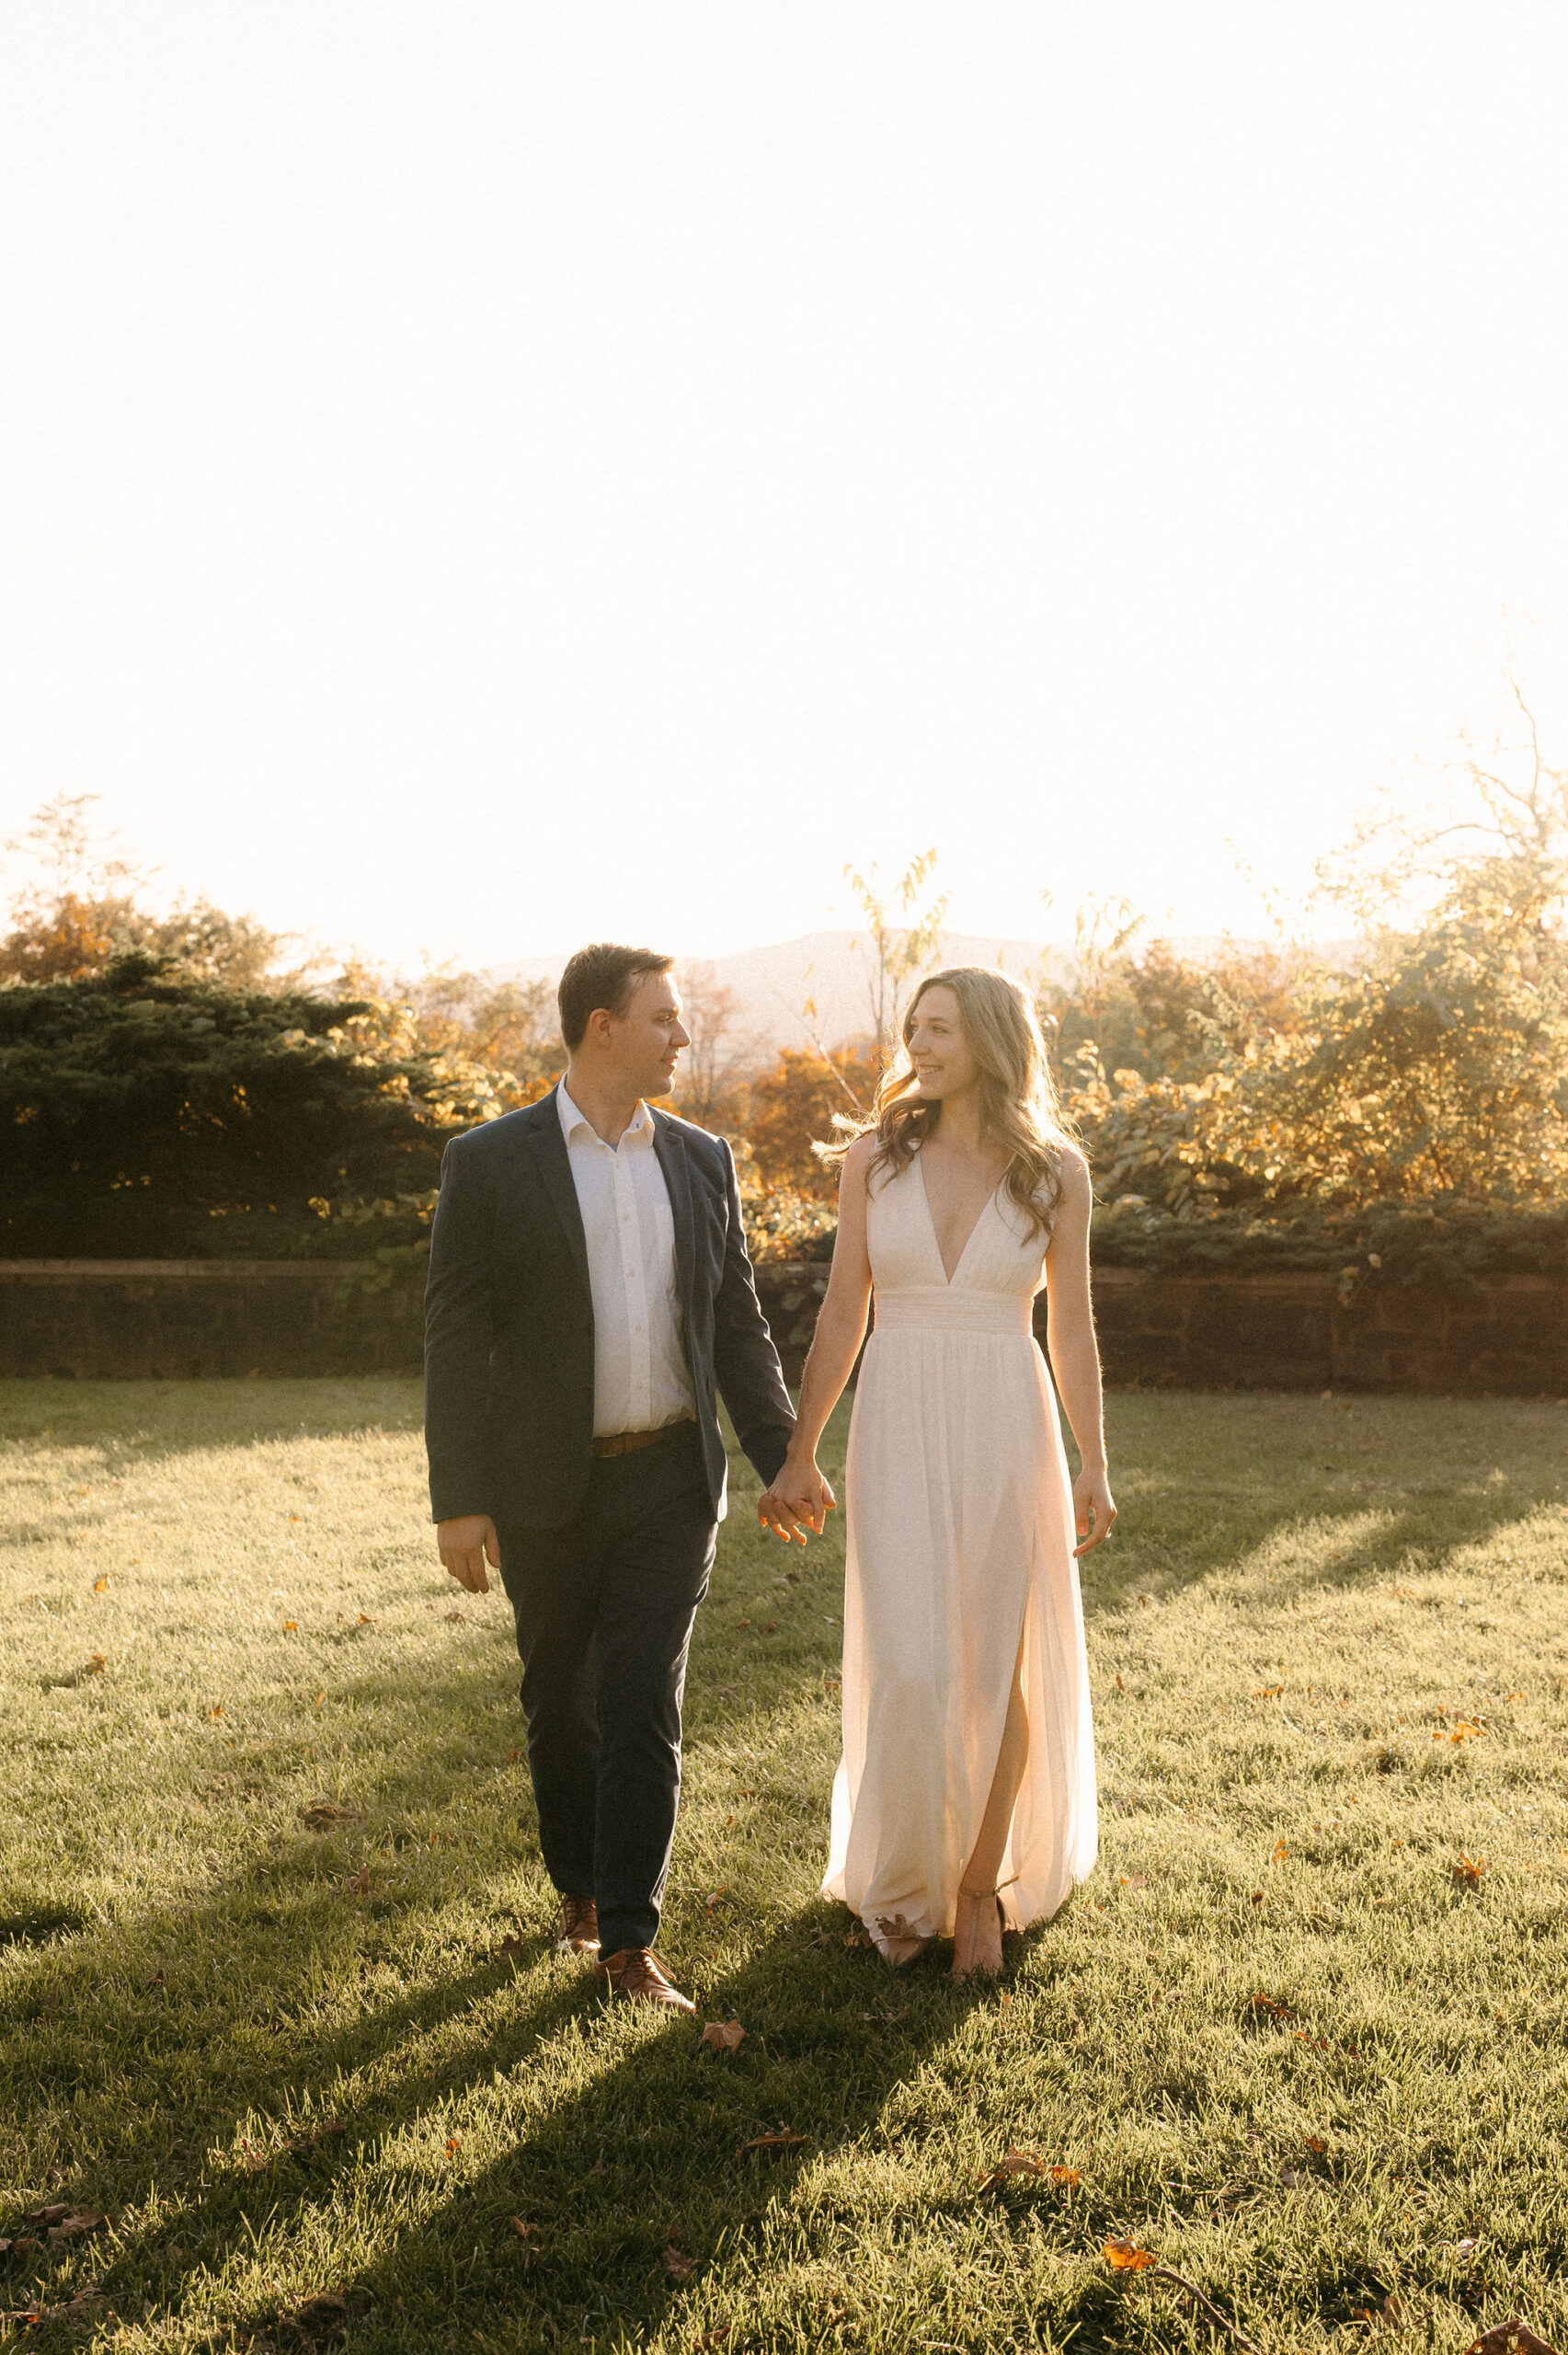 Skylands Manor engagement session by Lisa Blanche Photography 